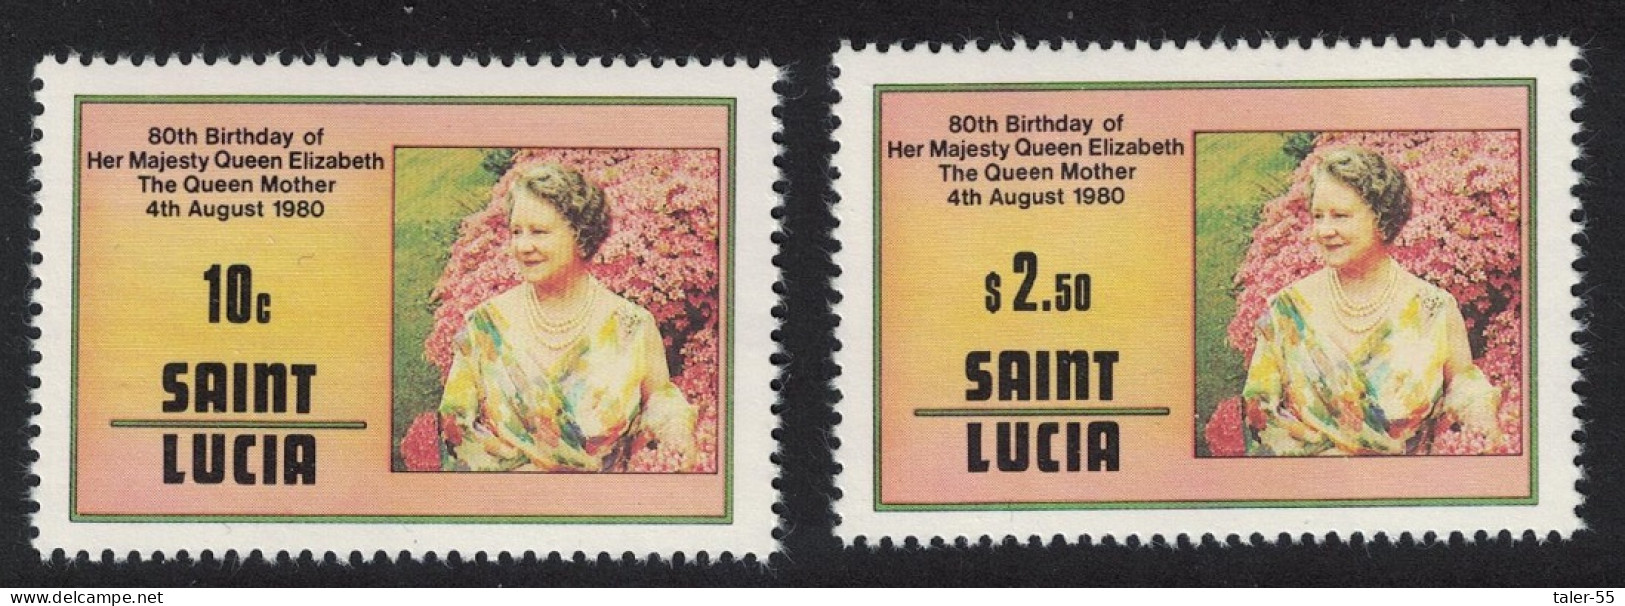 St. Lucia 80th Birthday Of The Queen Mother 2v 1980 MNH SG#534-535 - St.Lucia (1979-...)